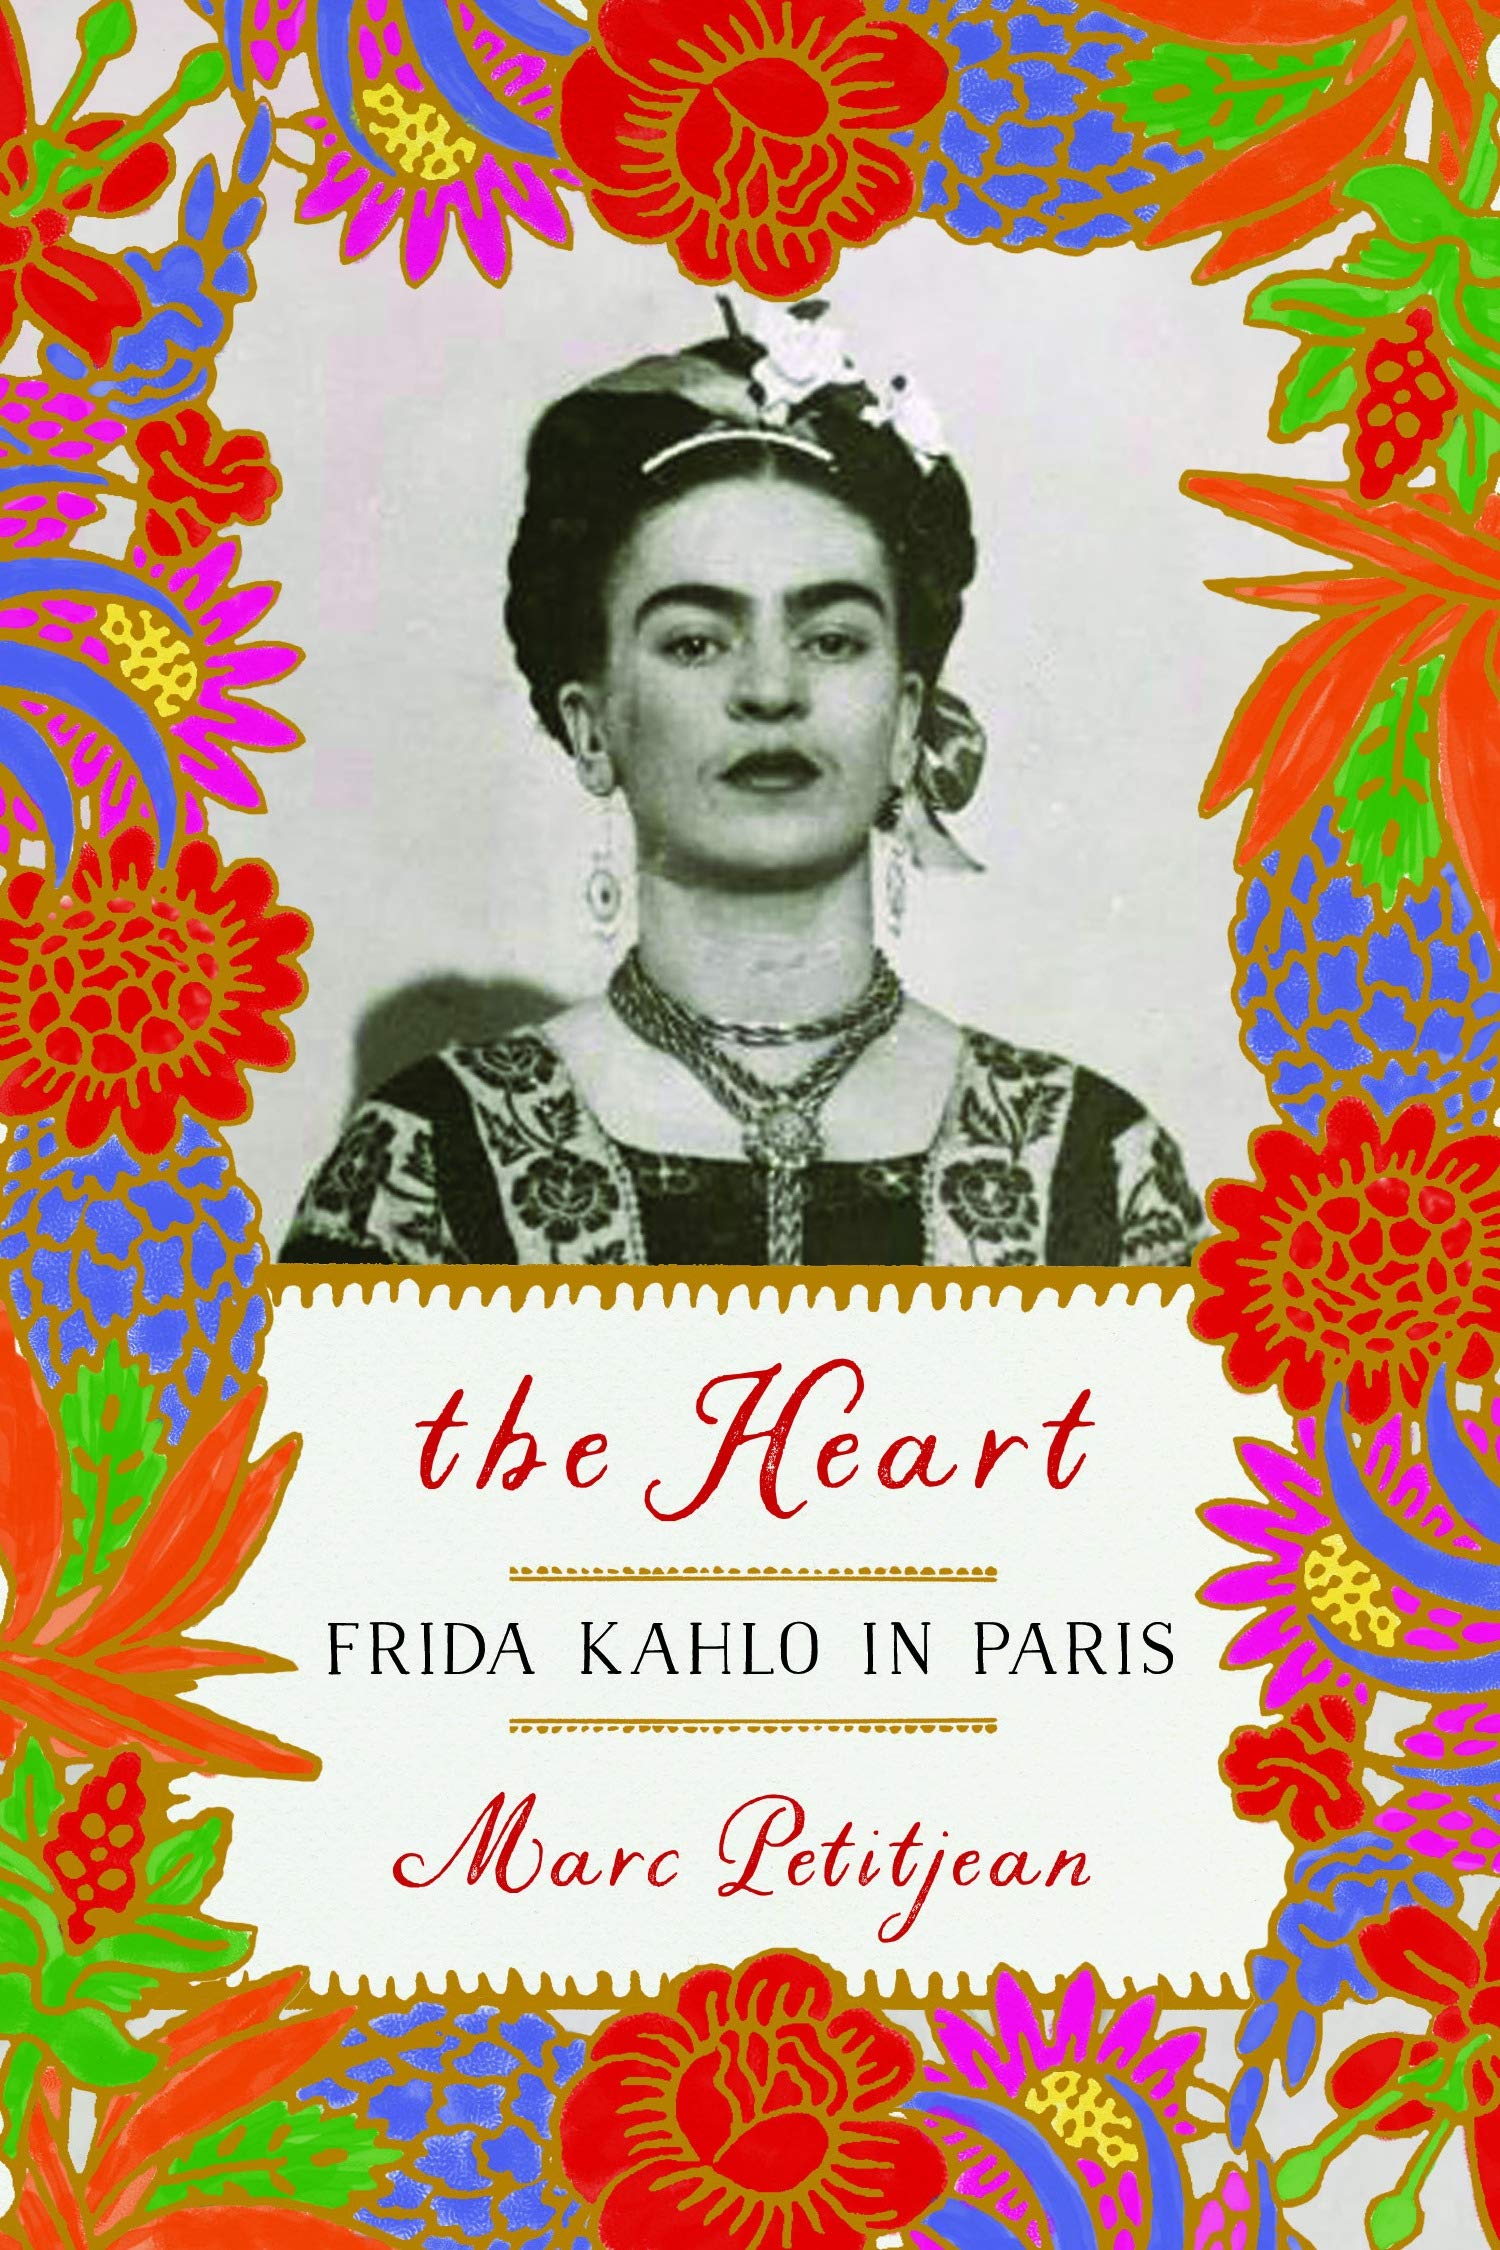 The cover of THE HEART: FRIDA KAHLO IN PARIS